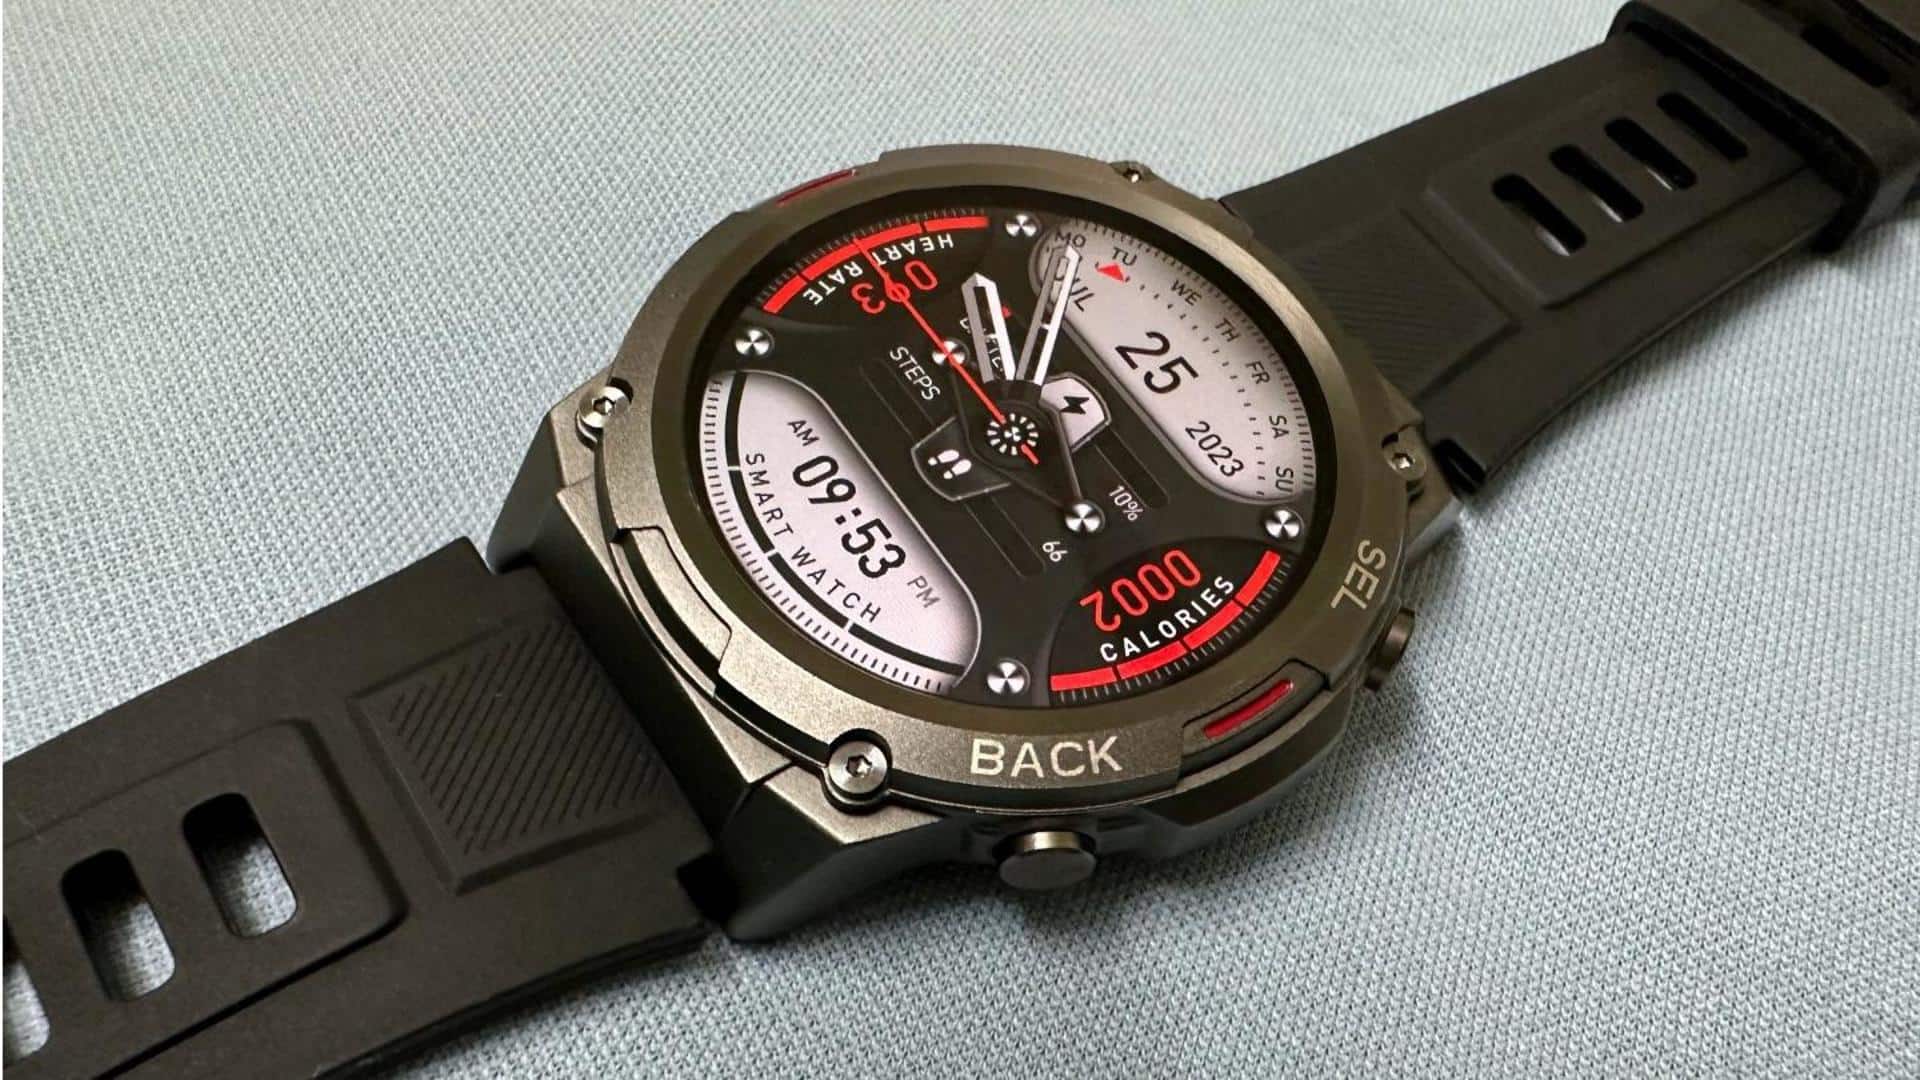 Crossbeats Armour Dive review: Rugged smartwatch with basic fitness tracking